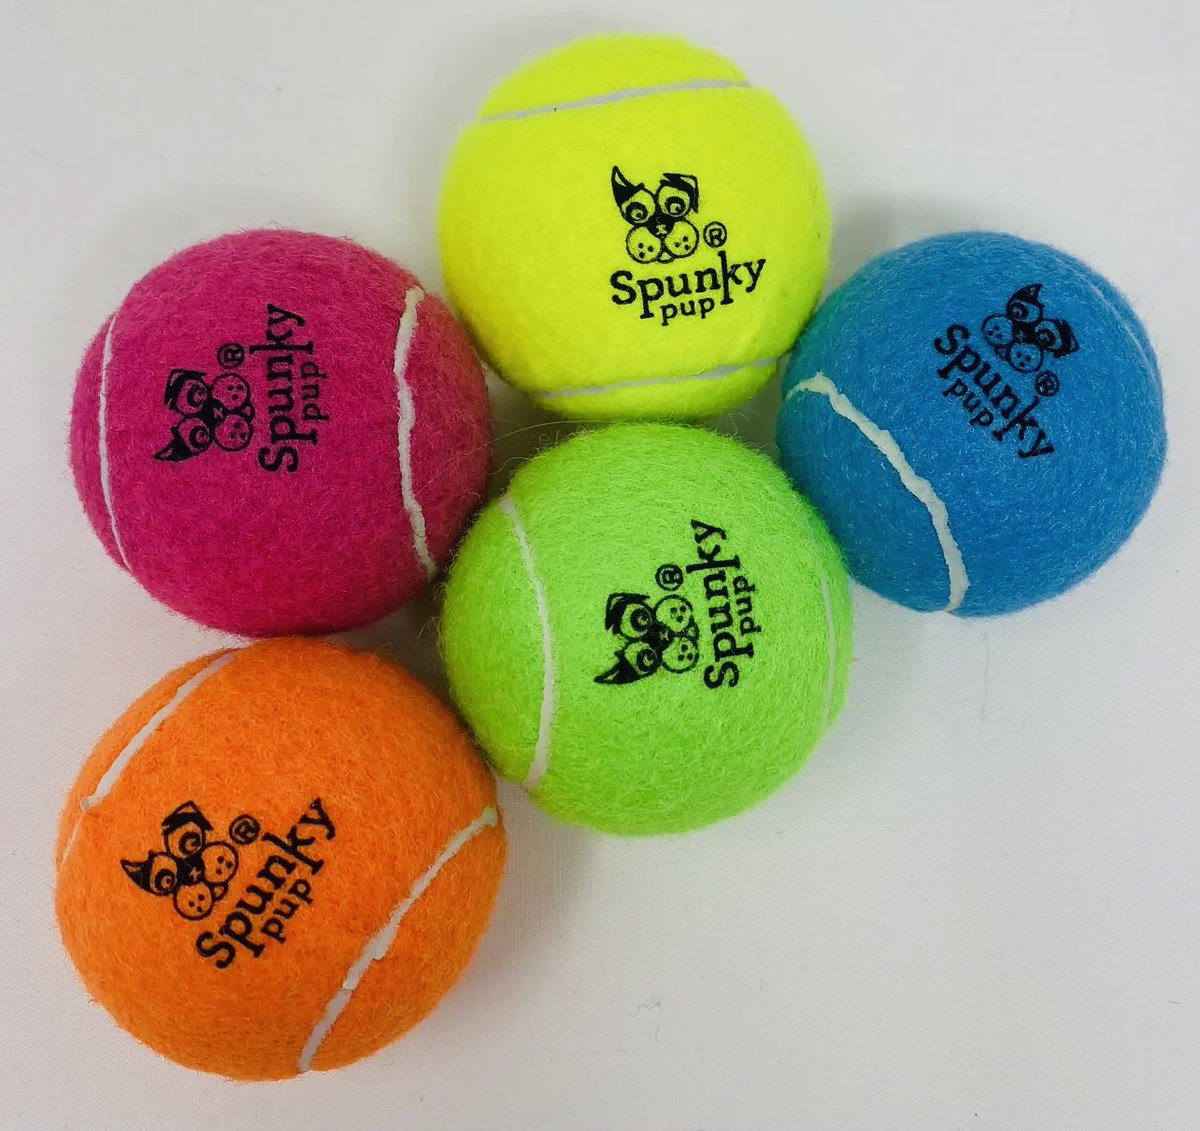 📣 We have an exciting announcement!! 🐶 All orders between now and Friday get a FREE bright colored & spankin new tennis ball 🎾 Yippeee!! Shop now 👉 barkandbeyondsupply.com #balls #dogs #dogsofx #dogsoftwitter #Wednesdayvibe #shopsmall #SmallBusiness @WCrates…